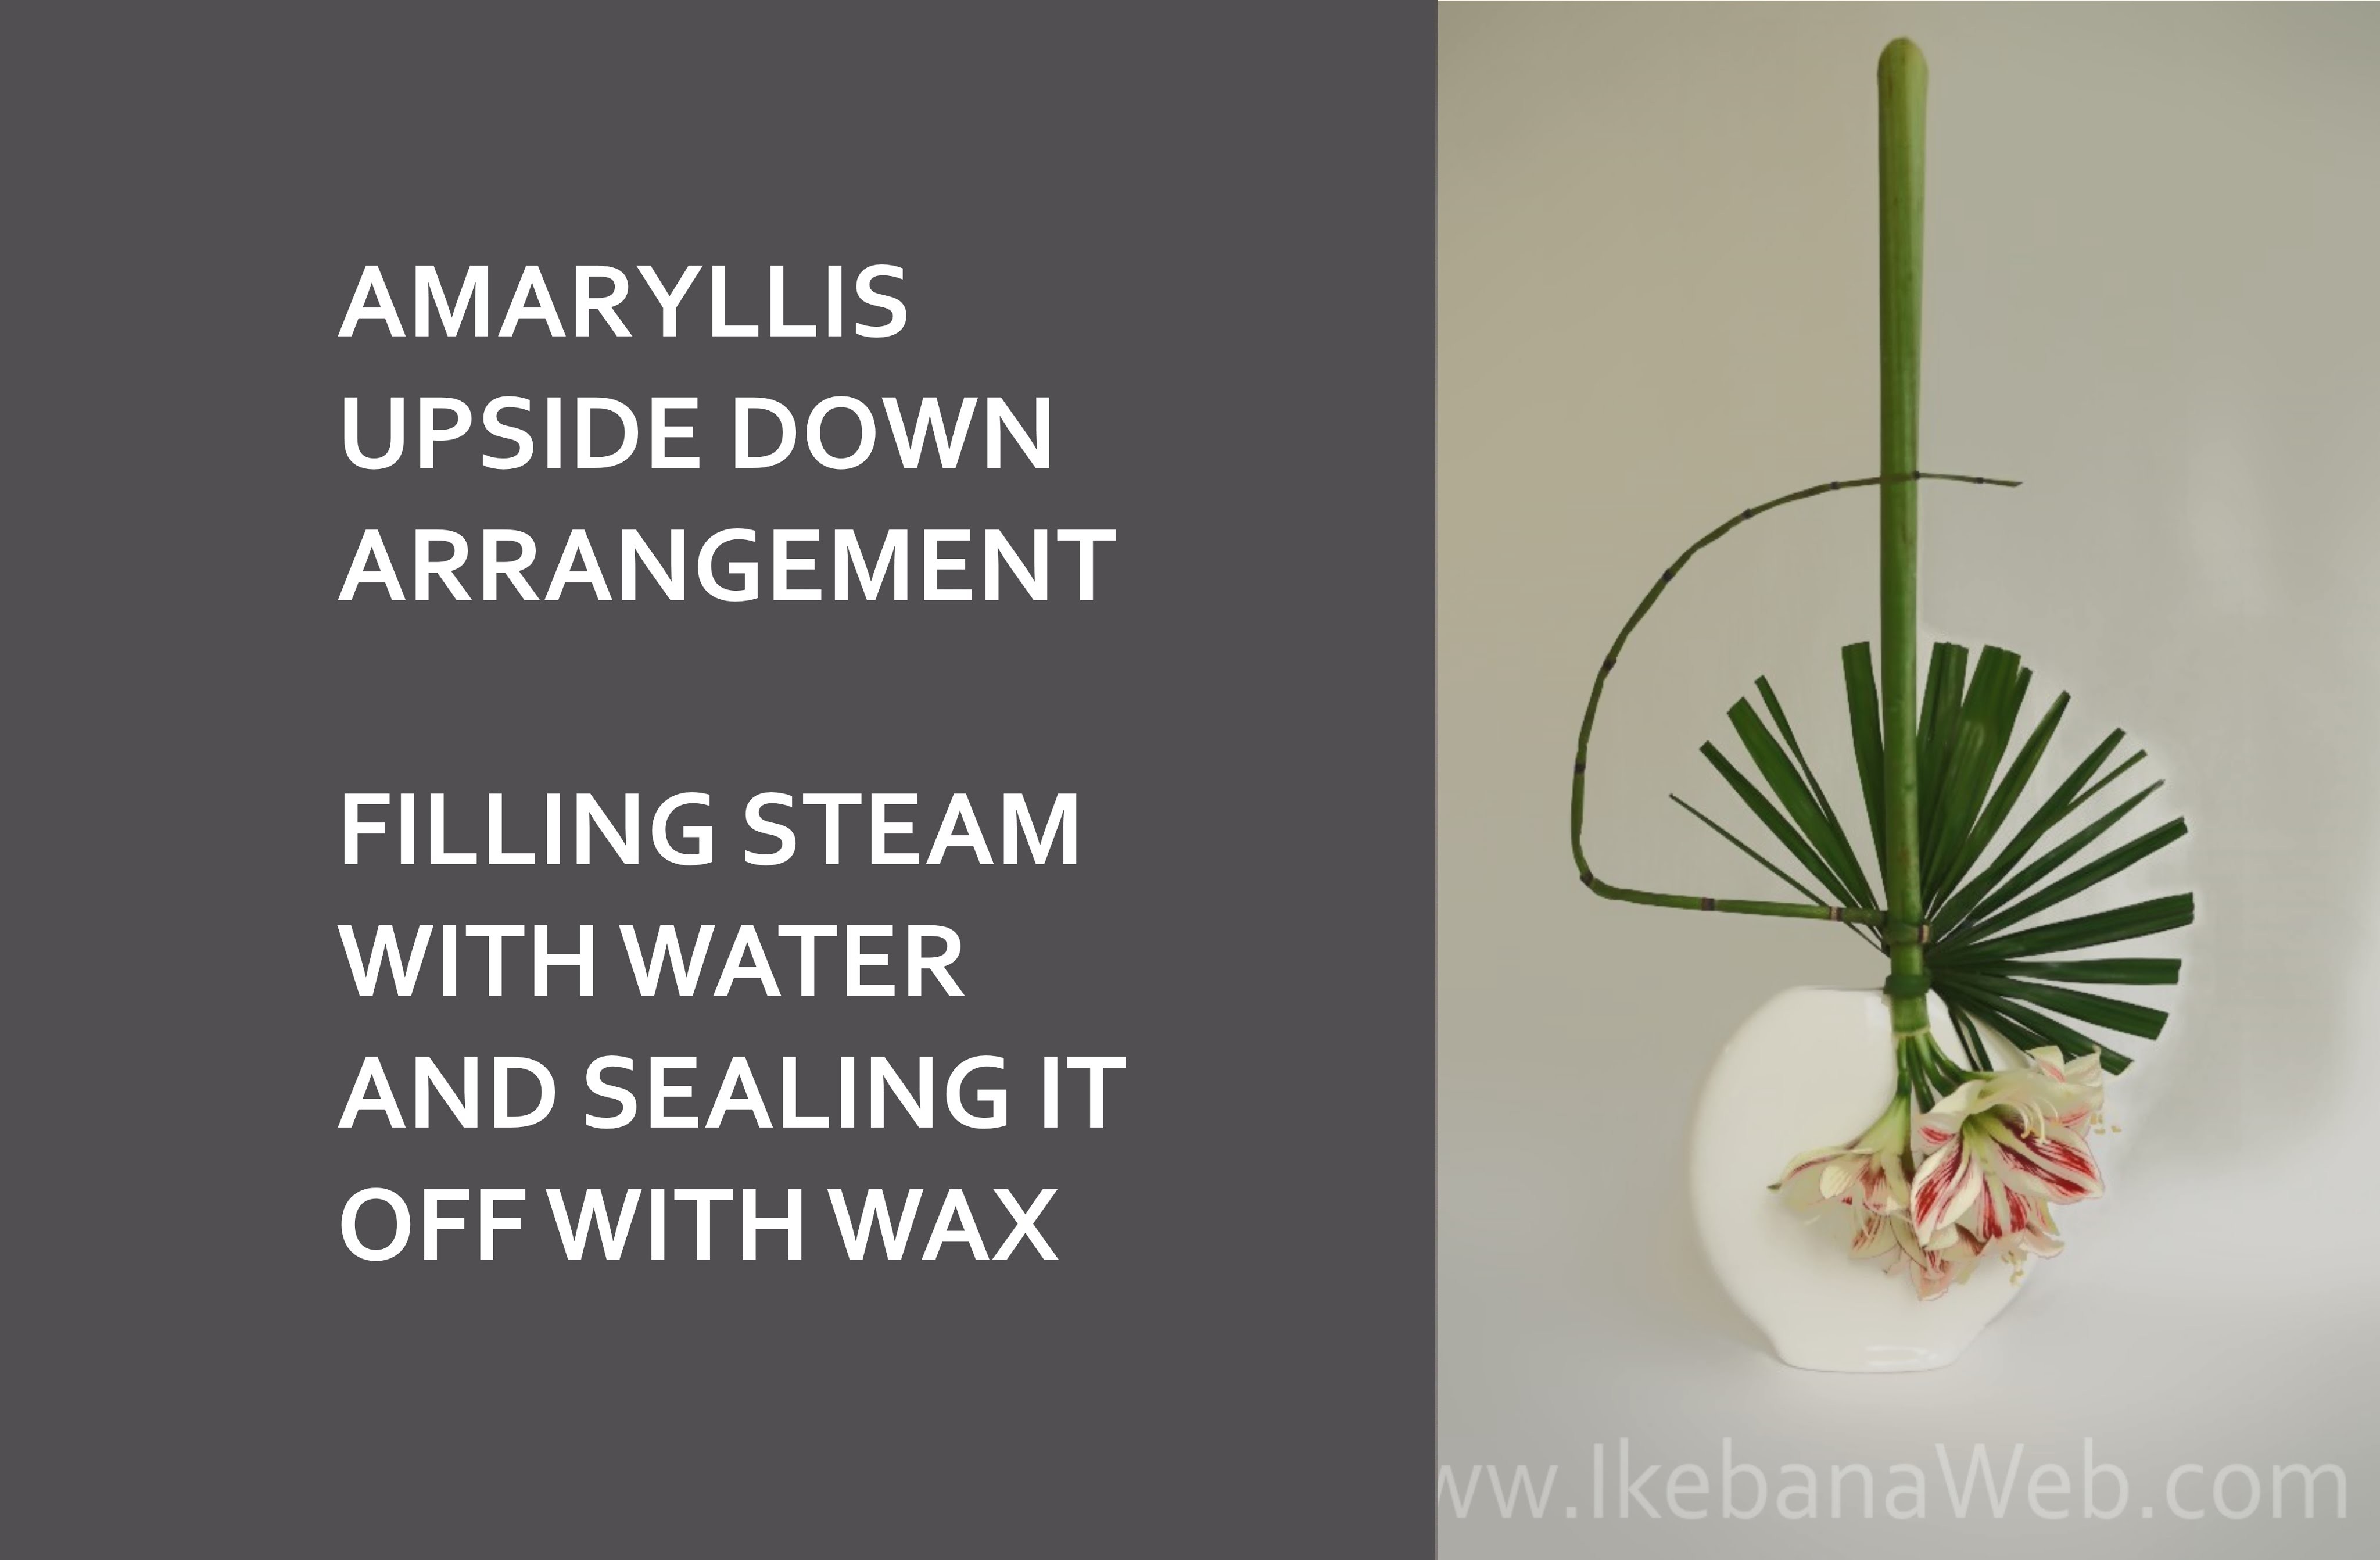 Amaryllis tutorial: filling up stems with water and sealing them off for upside down arrangements